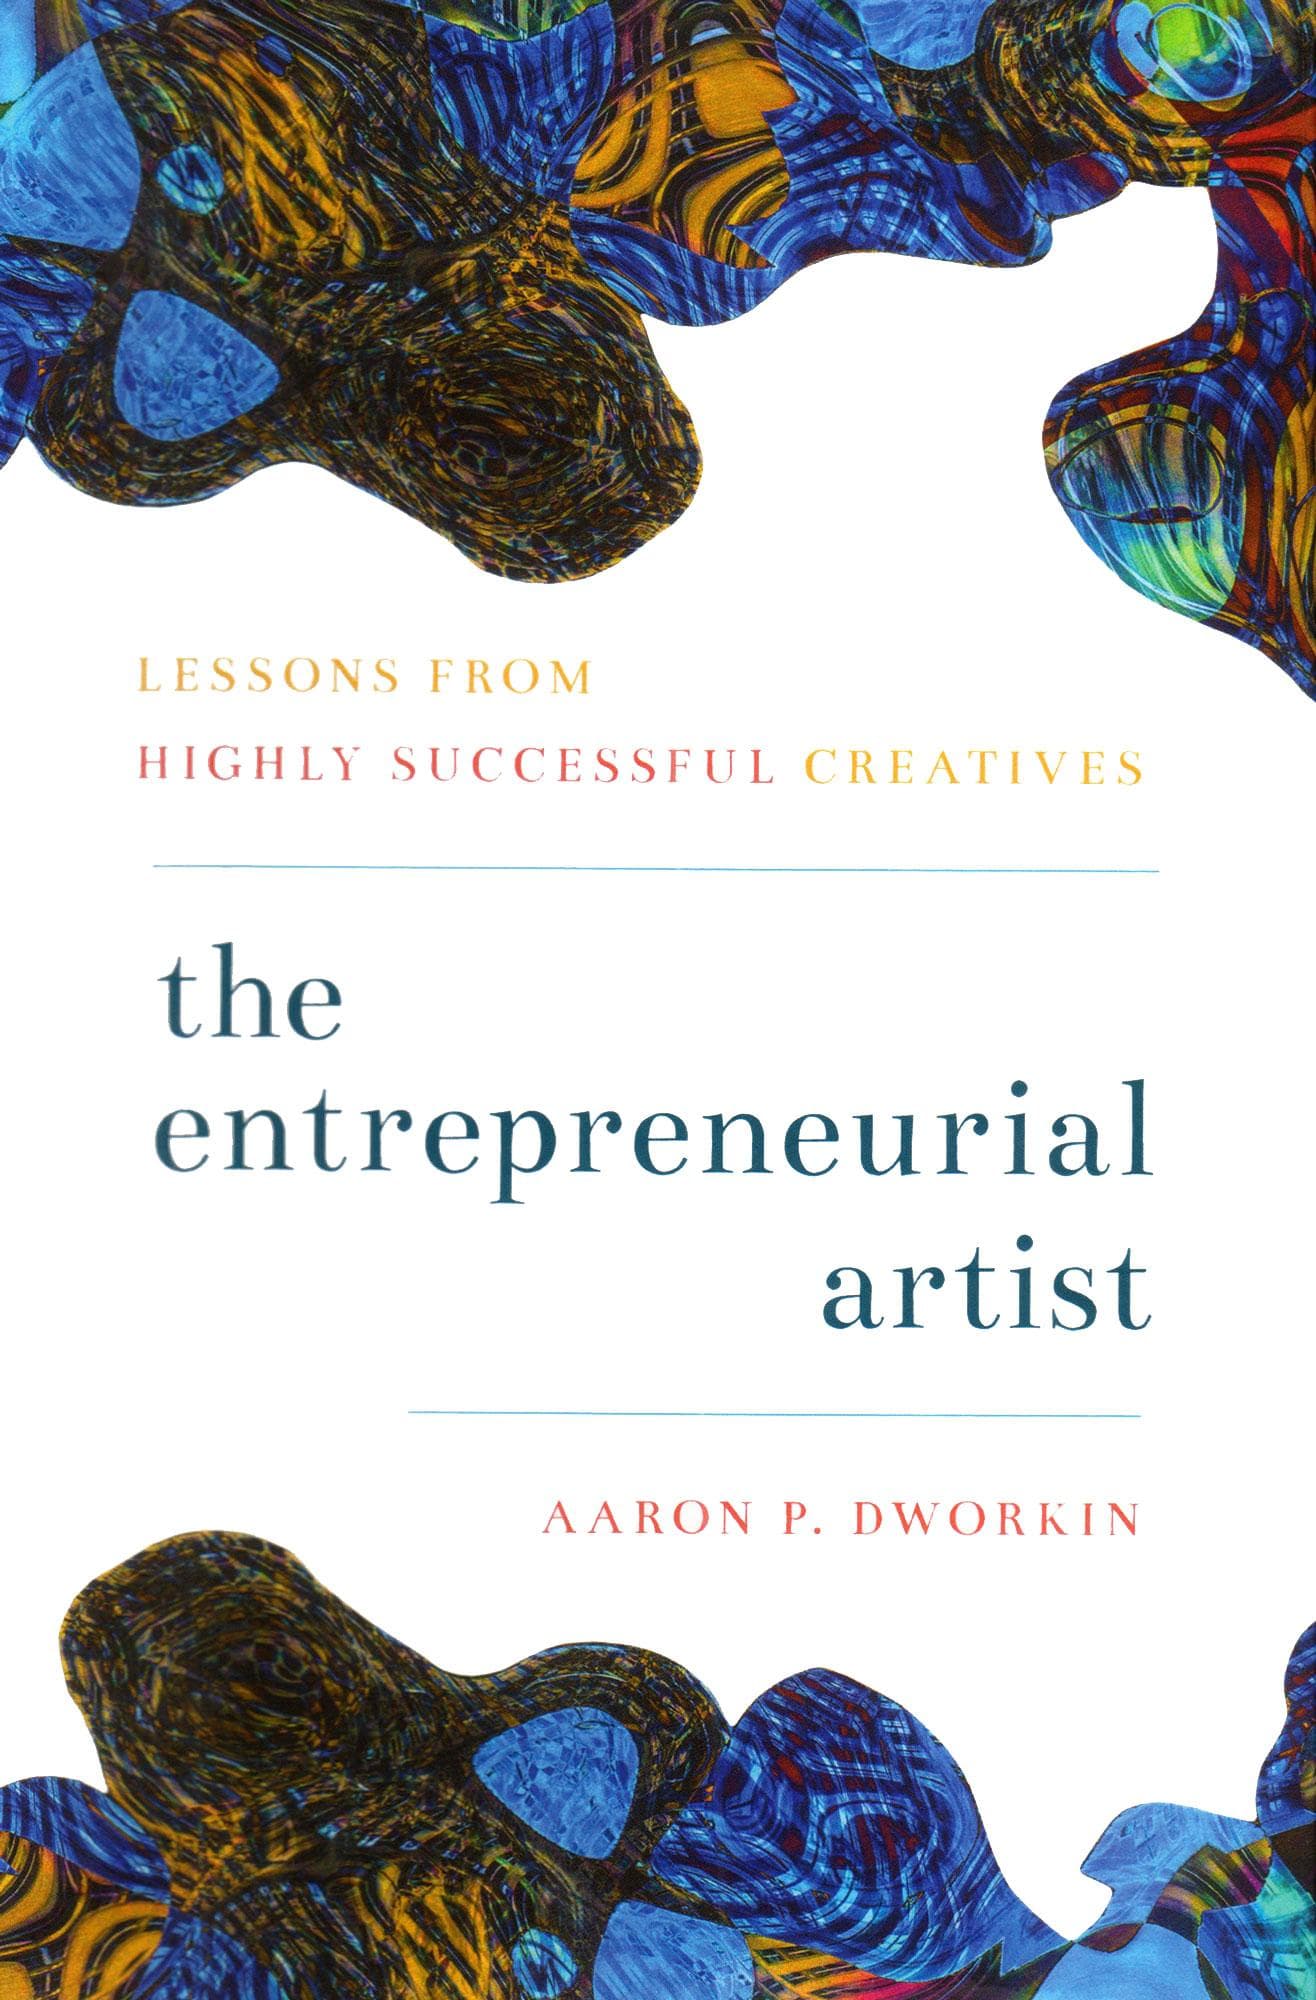 The Entrepreneurial Artist: Lessons from Highly Successful Creatives by Aaron Dworkin